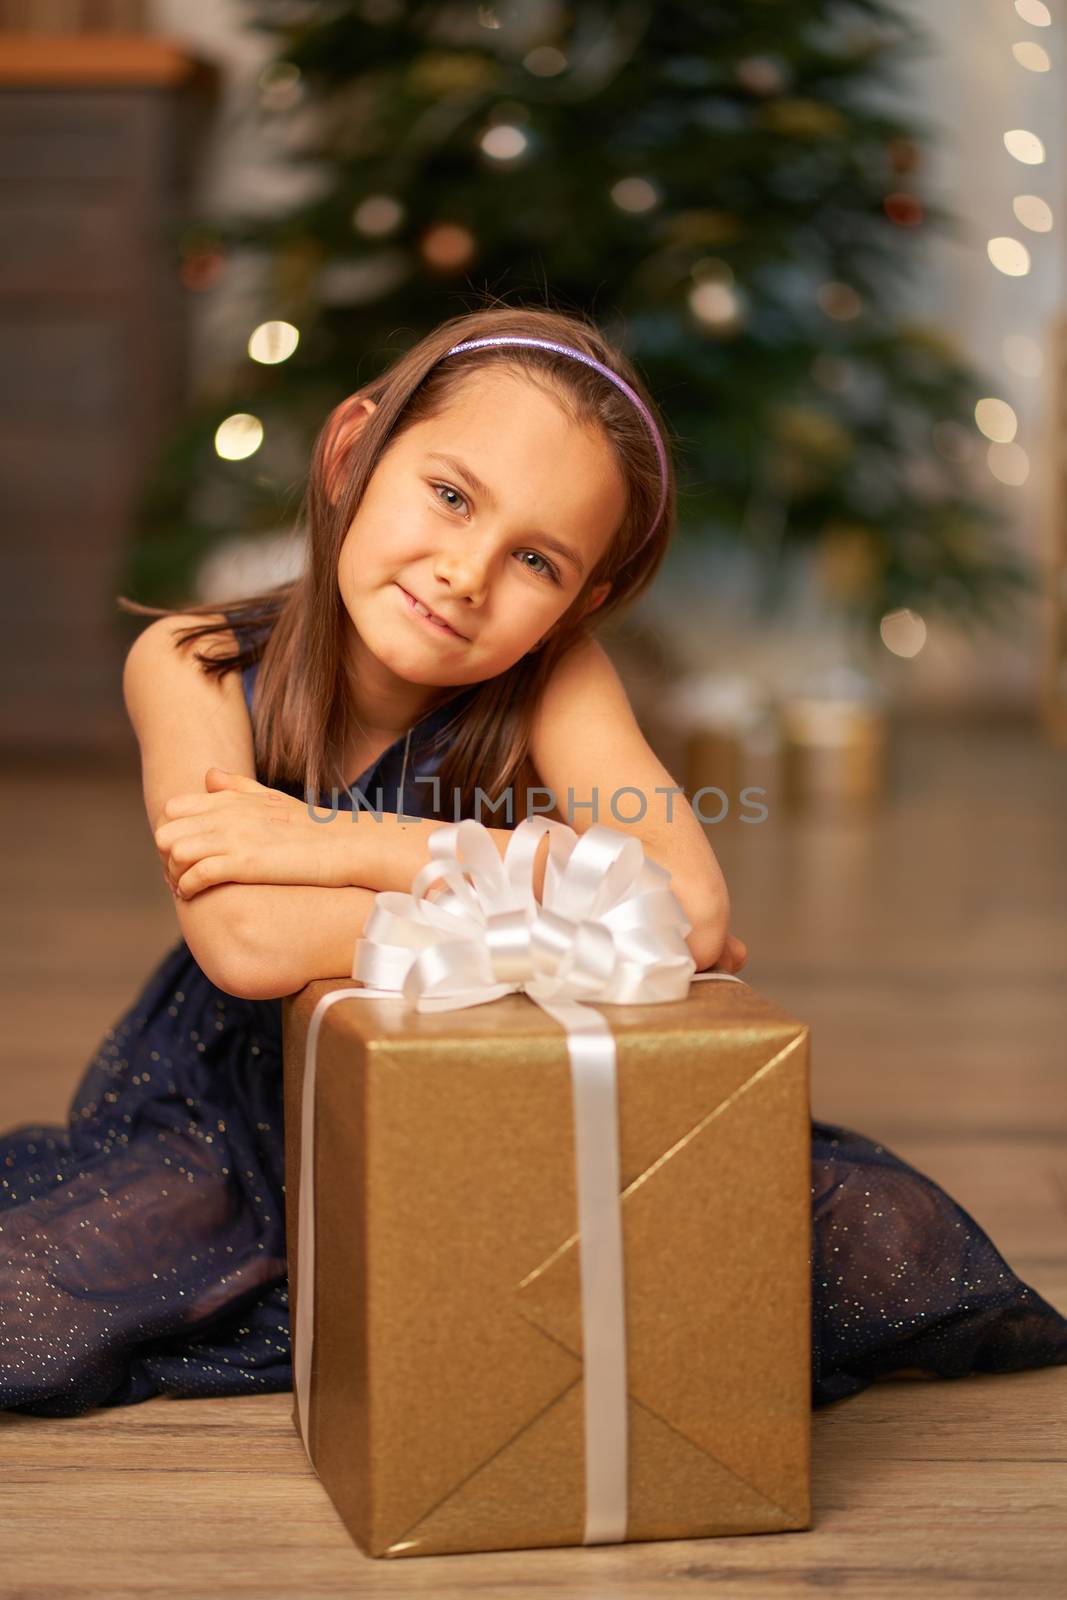 Happy childhood, Christmas magic fairy tale. Little girl dreams before opening Santa's present for Christmas.